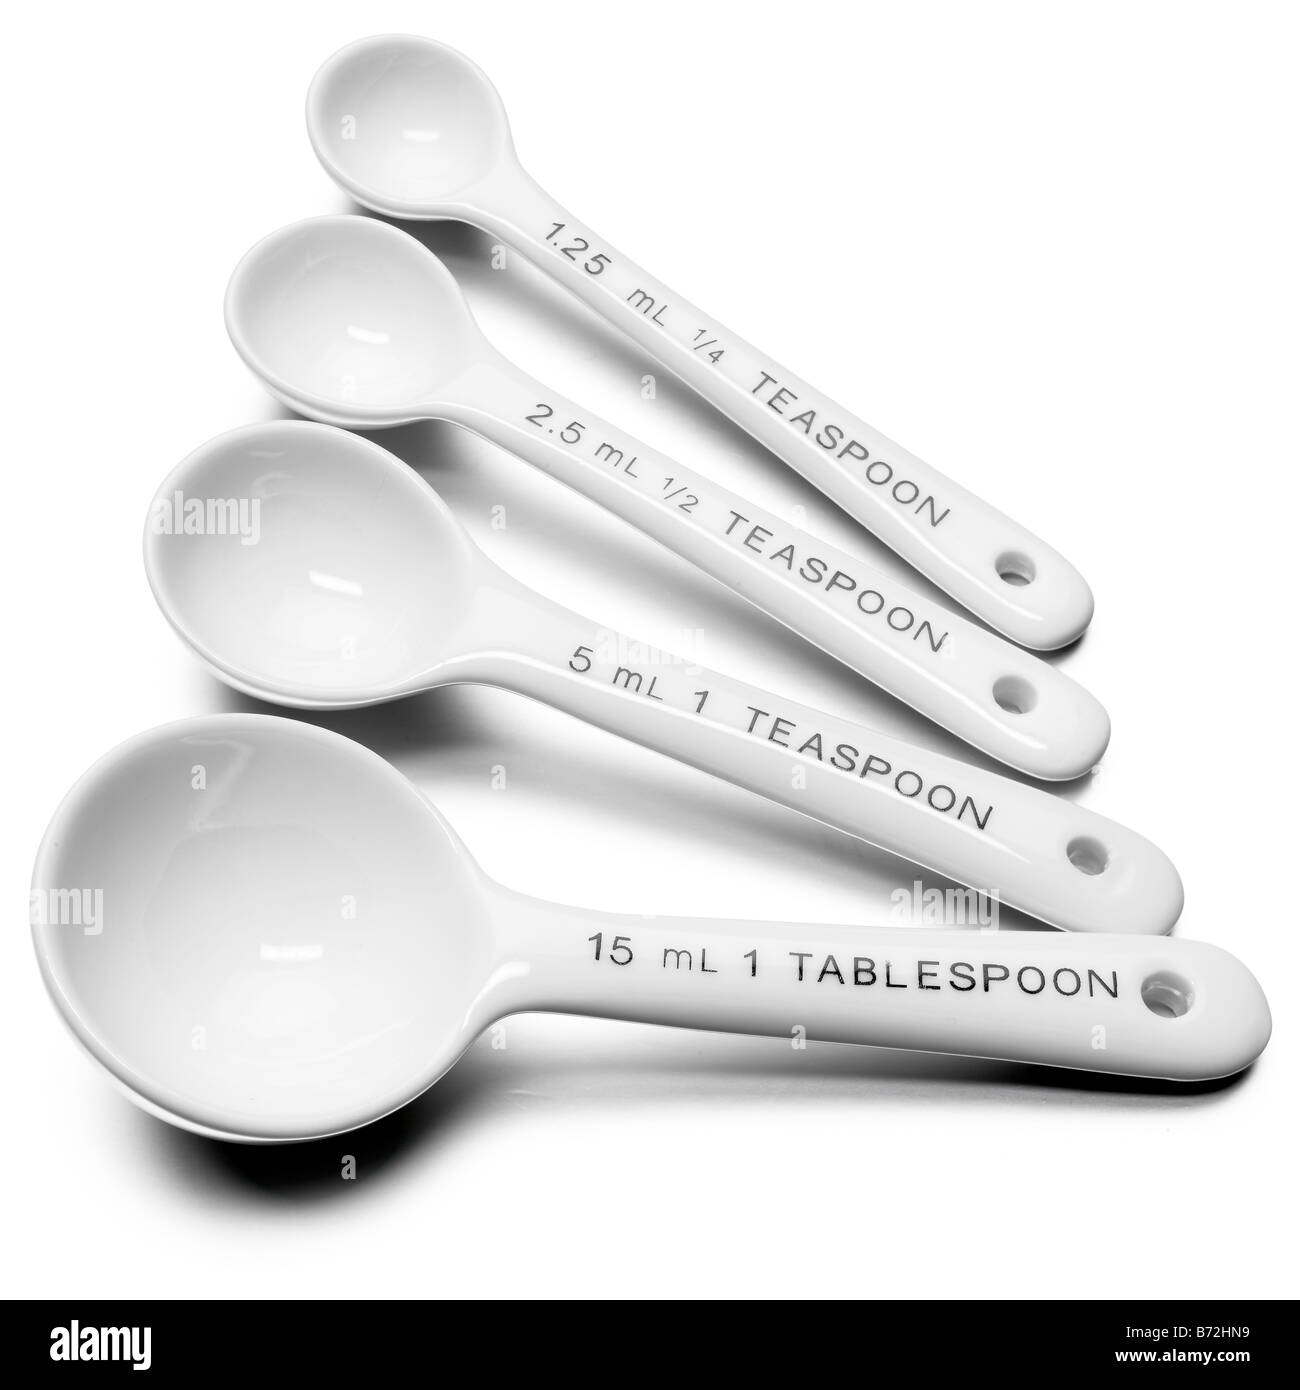 Kitchen Tools Close Up Of Multi Colored Measuring Spoons Isolated On White  Background Stock Photo - Download Image Now - iStock